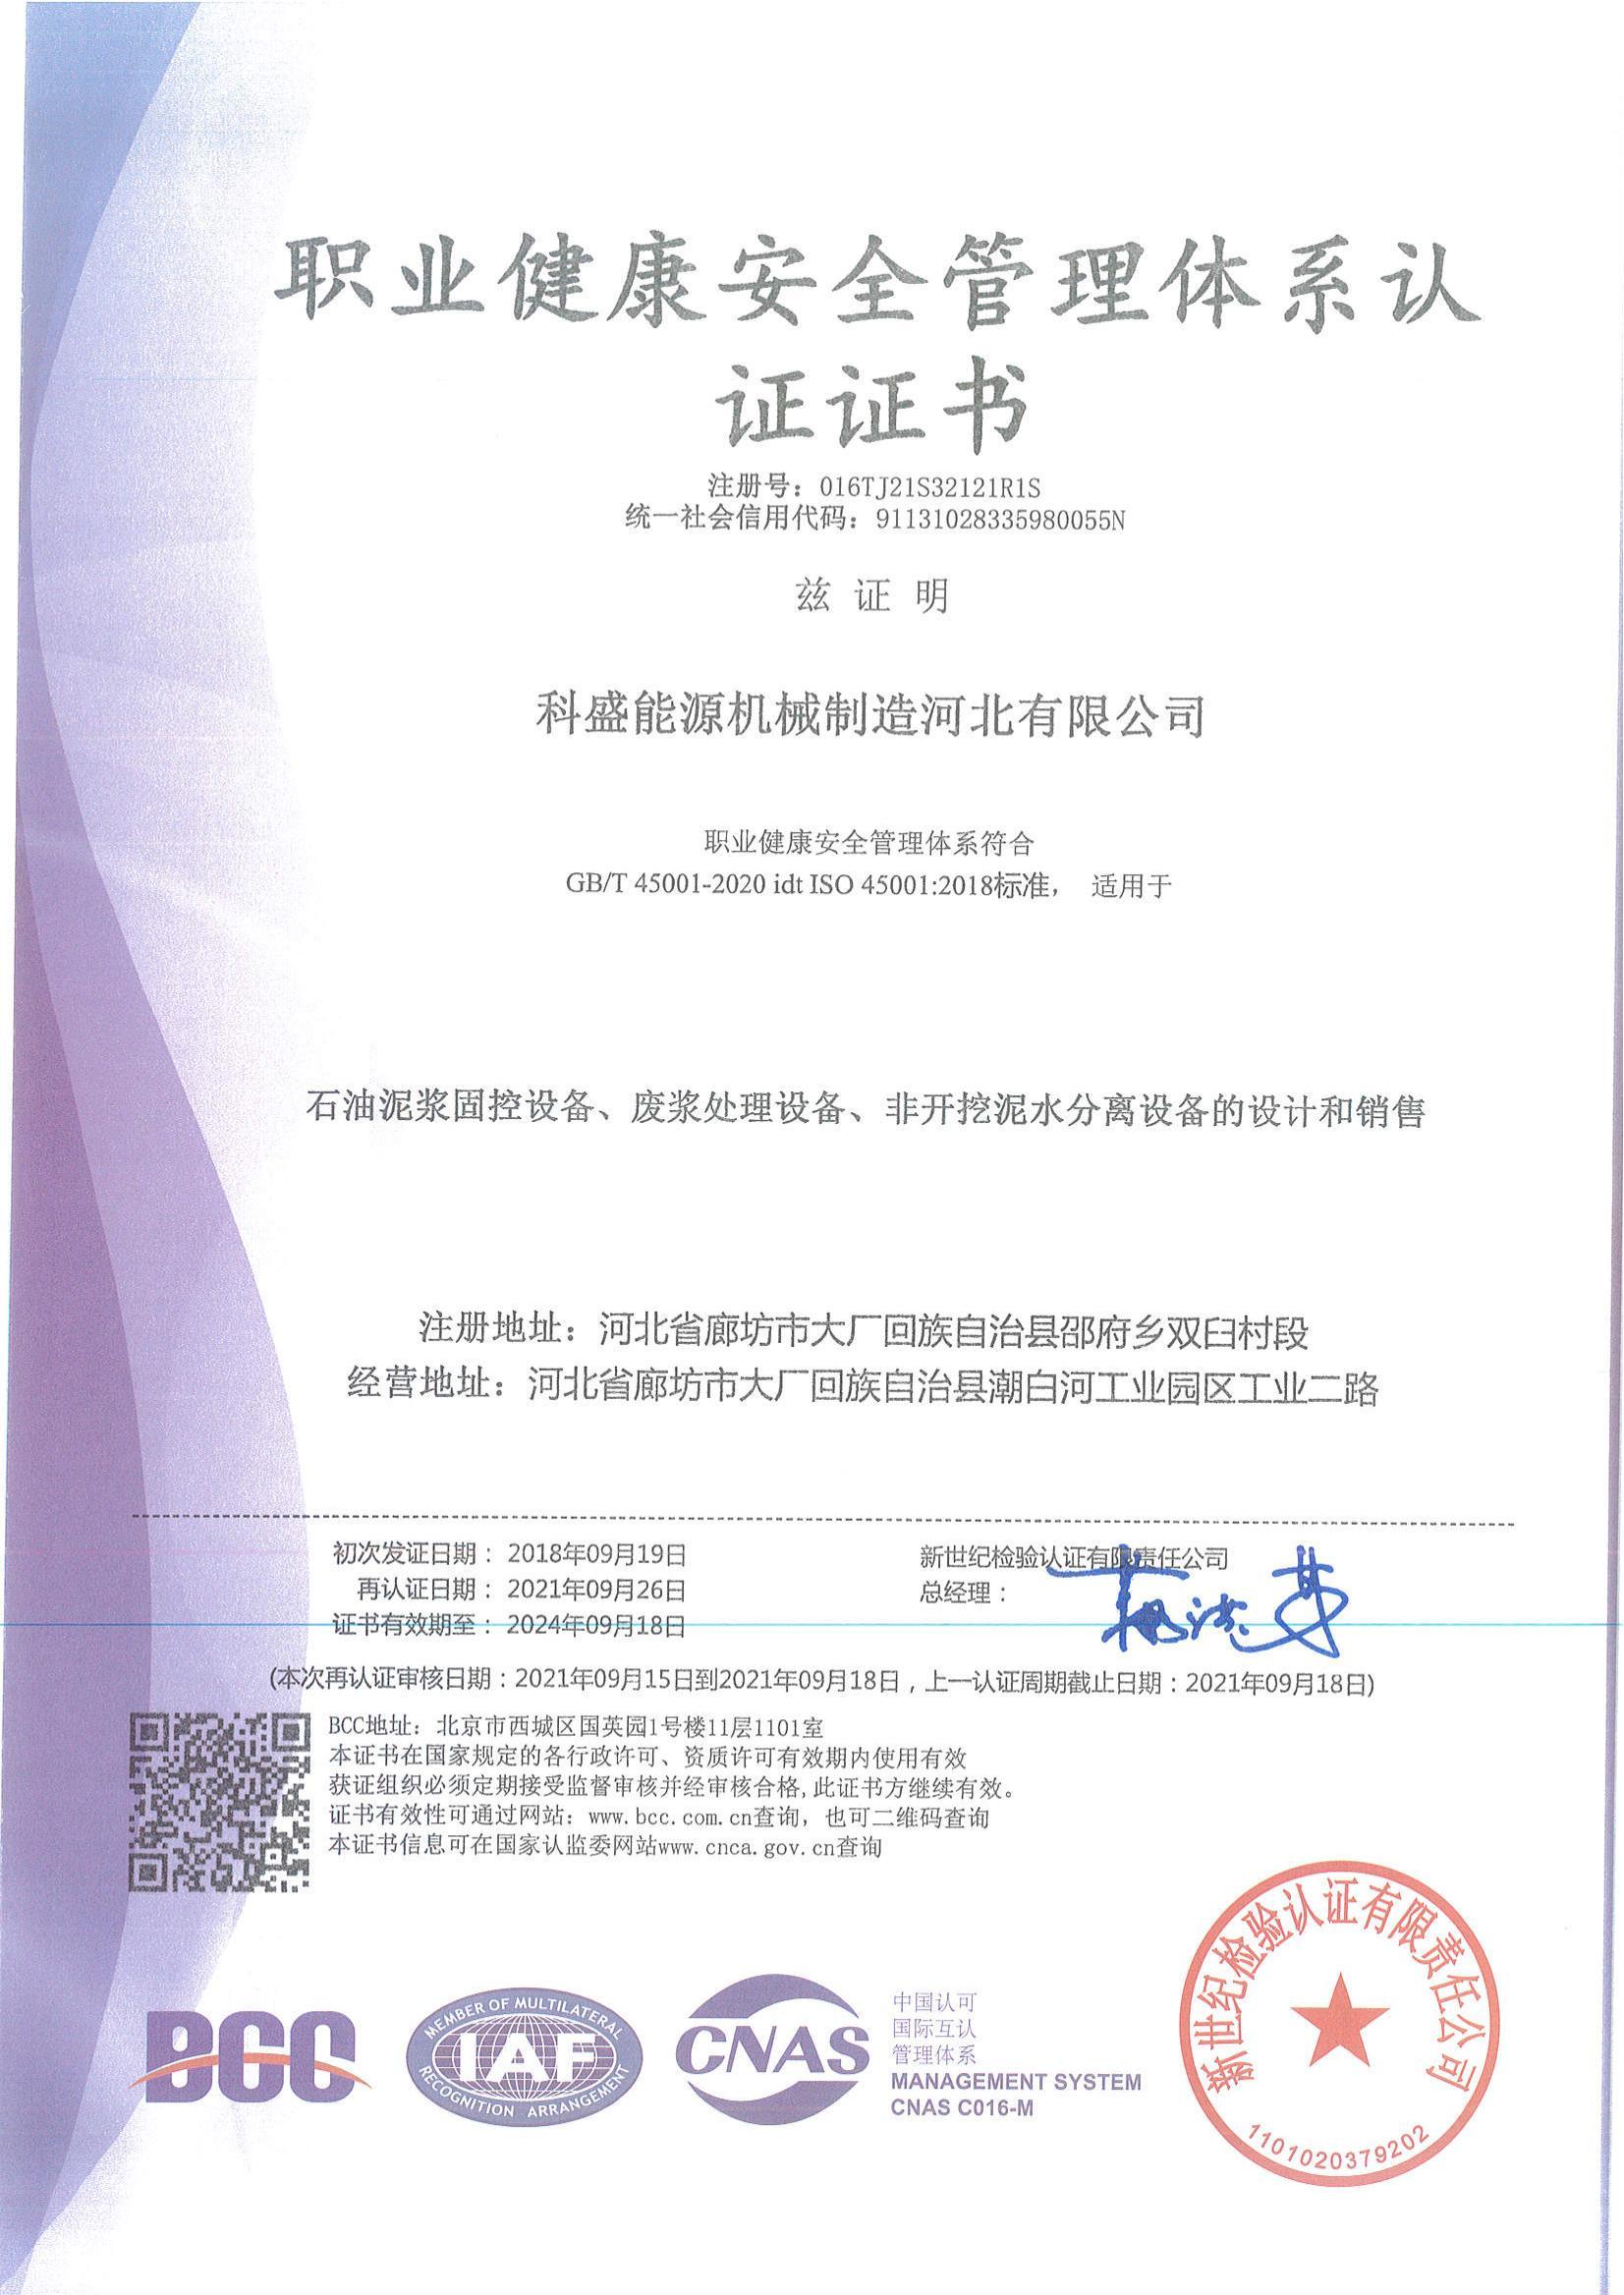 Occupational Health and Safety Management System Certification